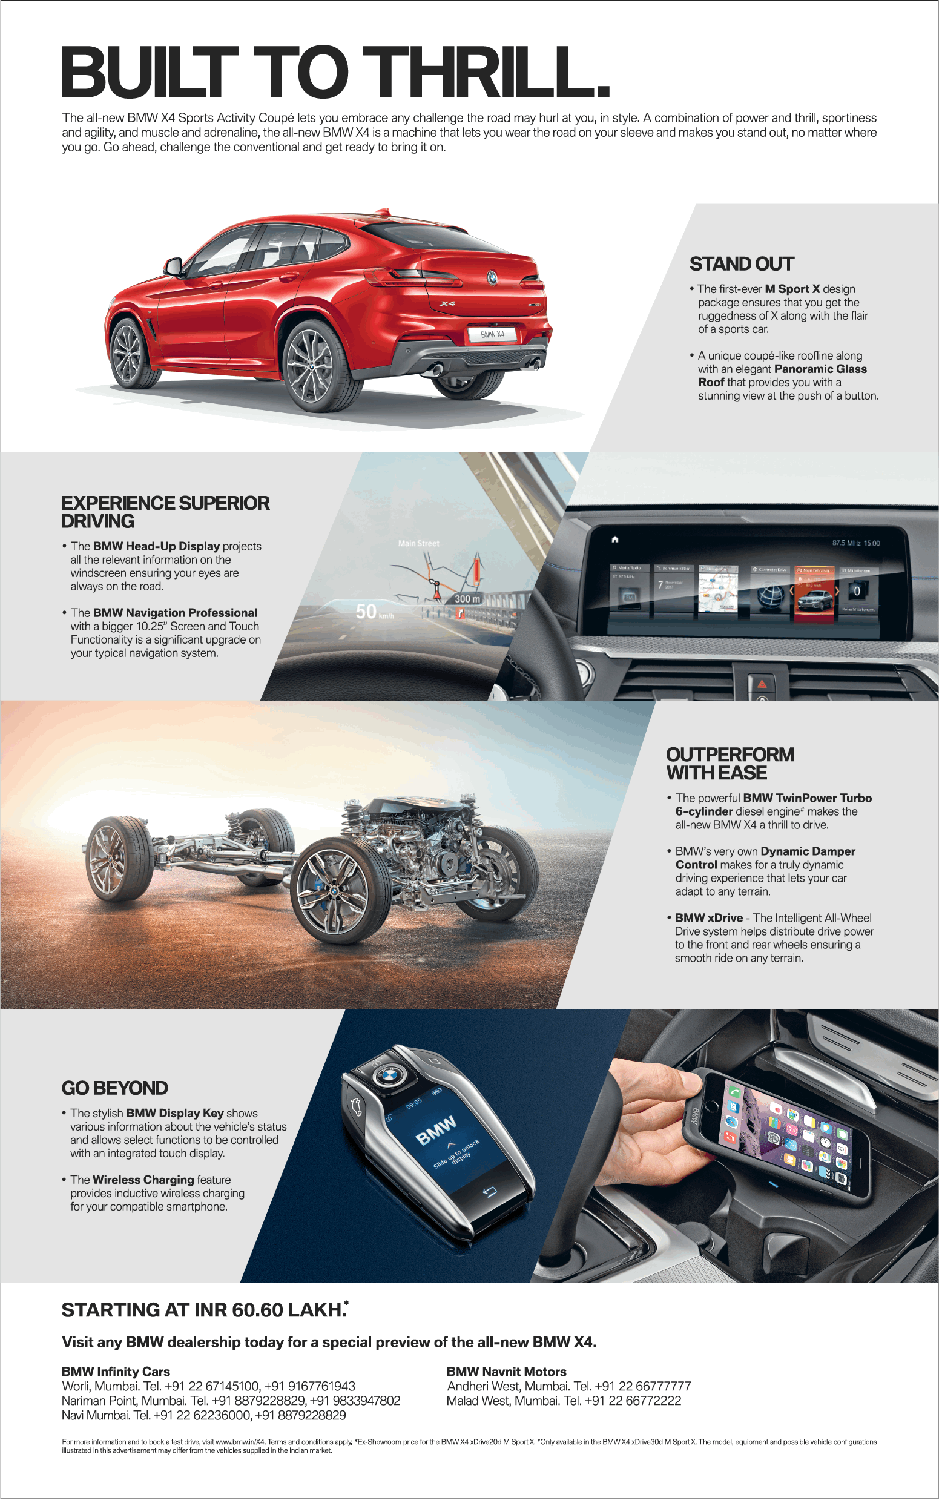 bmw-x4-car-built-to-thrill-ad-bombay-times-24-01-2019.png